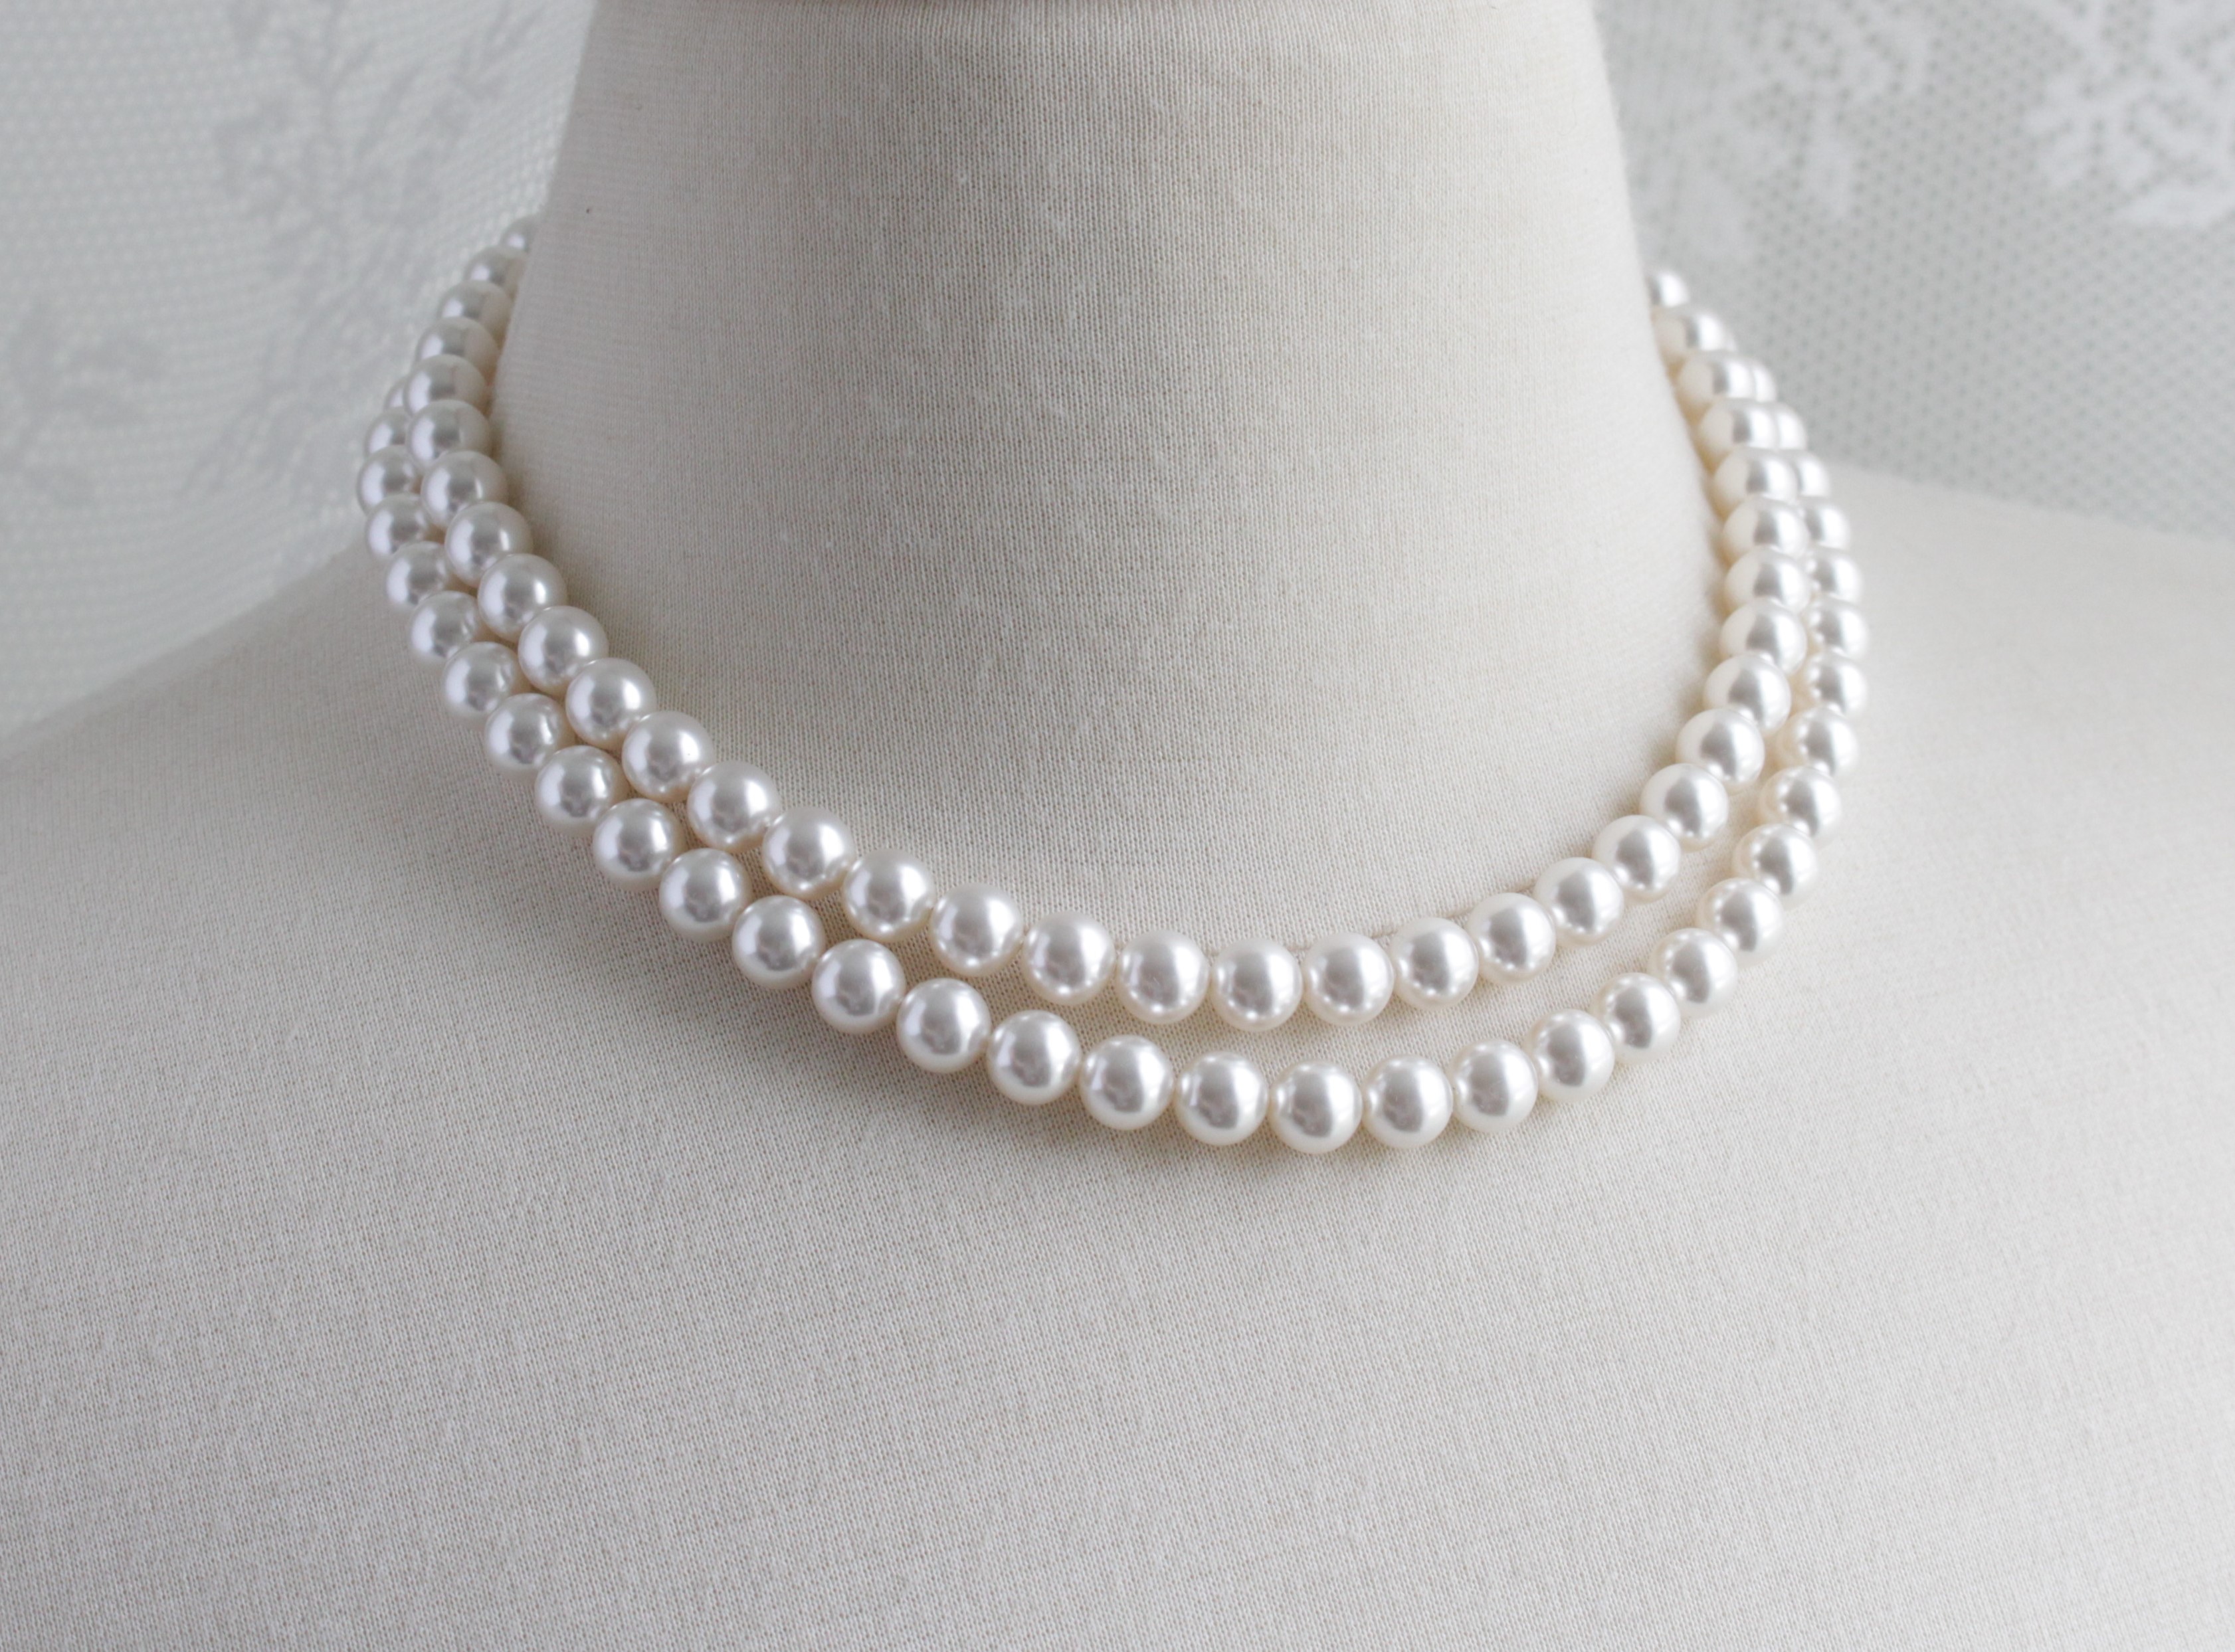 7 Important And Easy Steps To Value a White Pearl Necklace